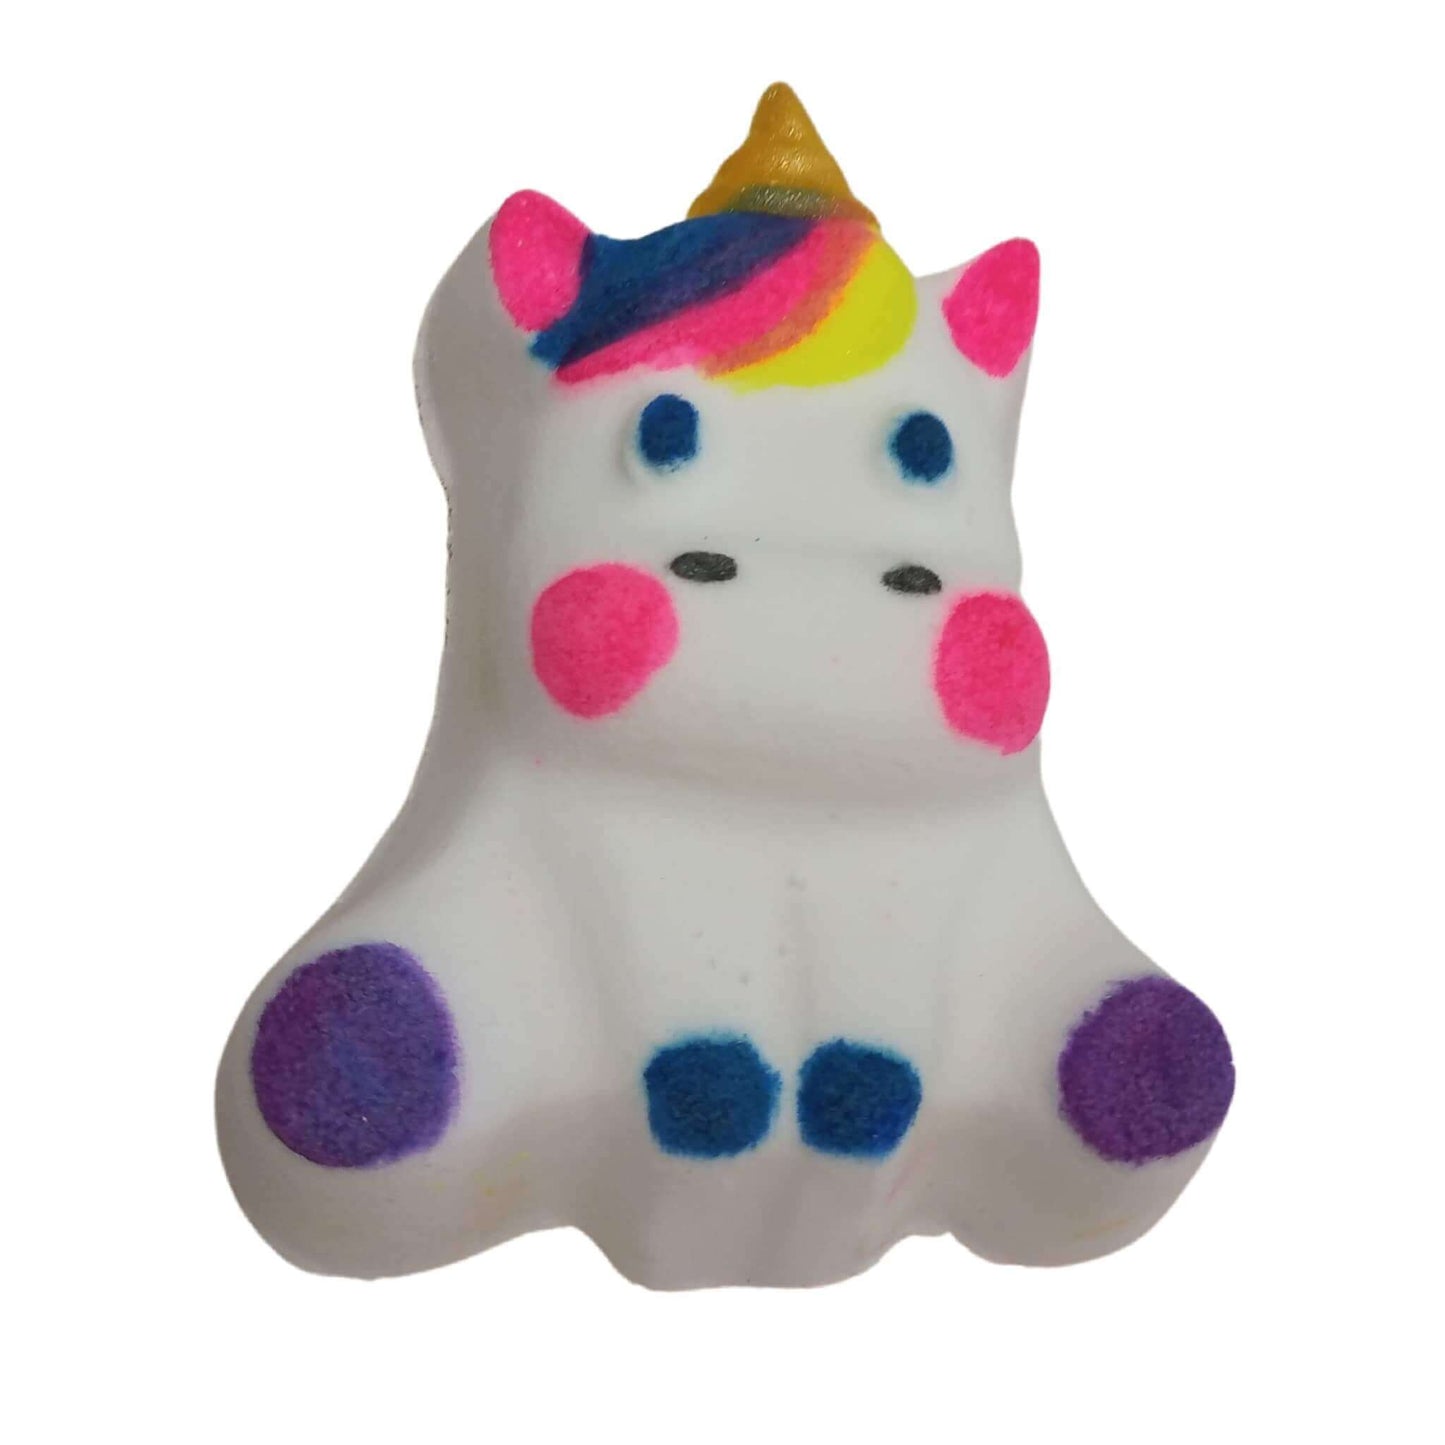 Bring magic to the tub with our Unicorn Baby Fizzy Bomb. Make bathtime more fun and exciting for your child!